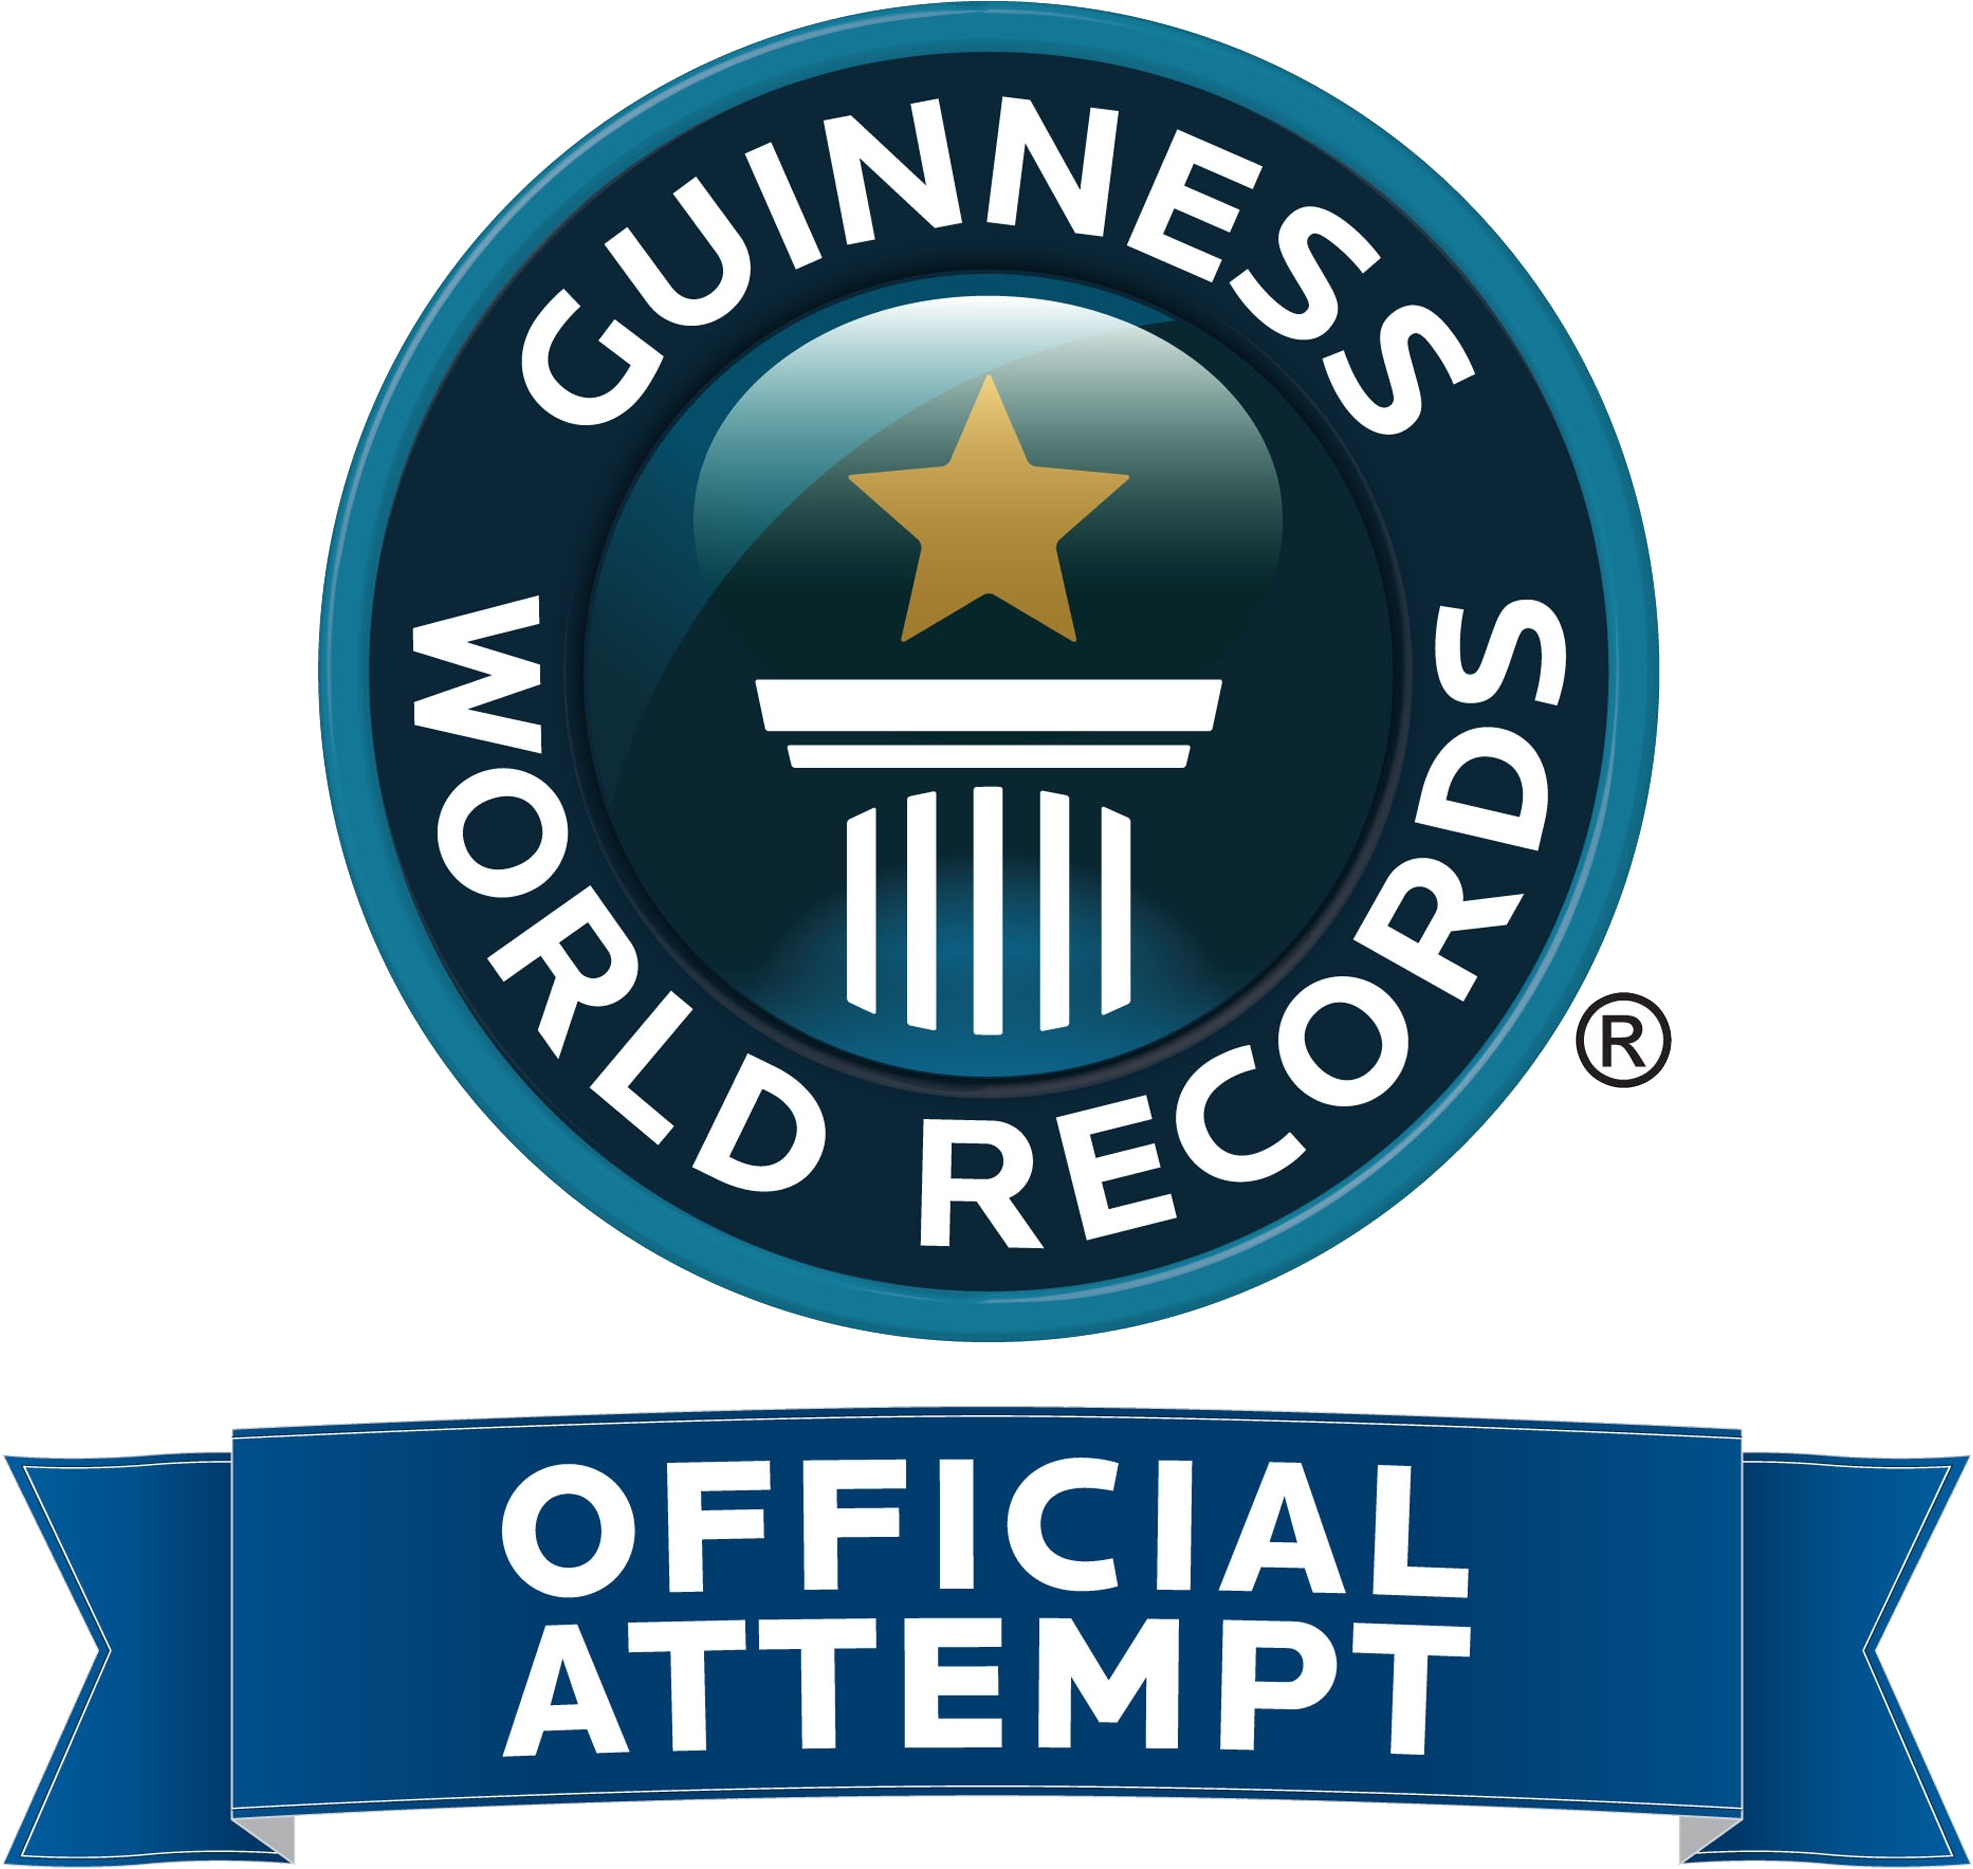 guinness-world-record-logo-download-free-png-images